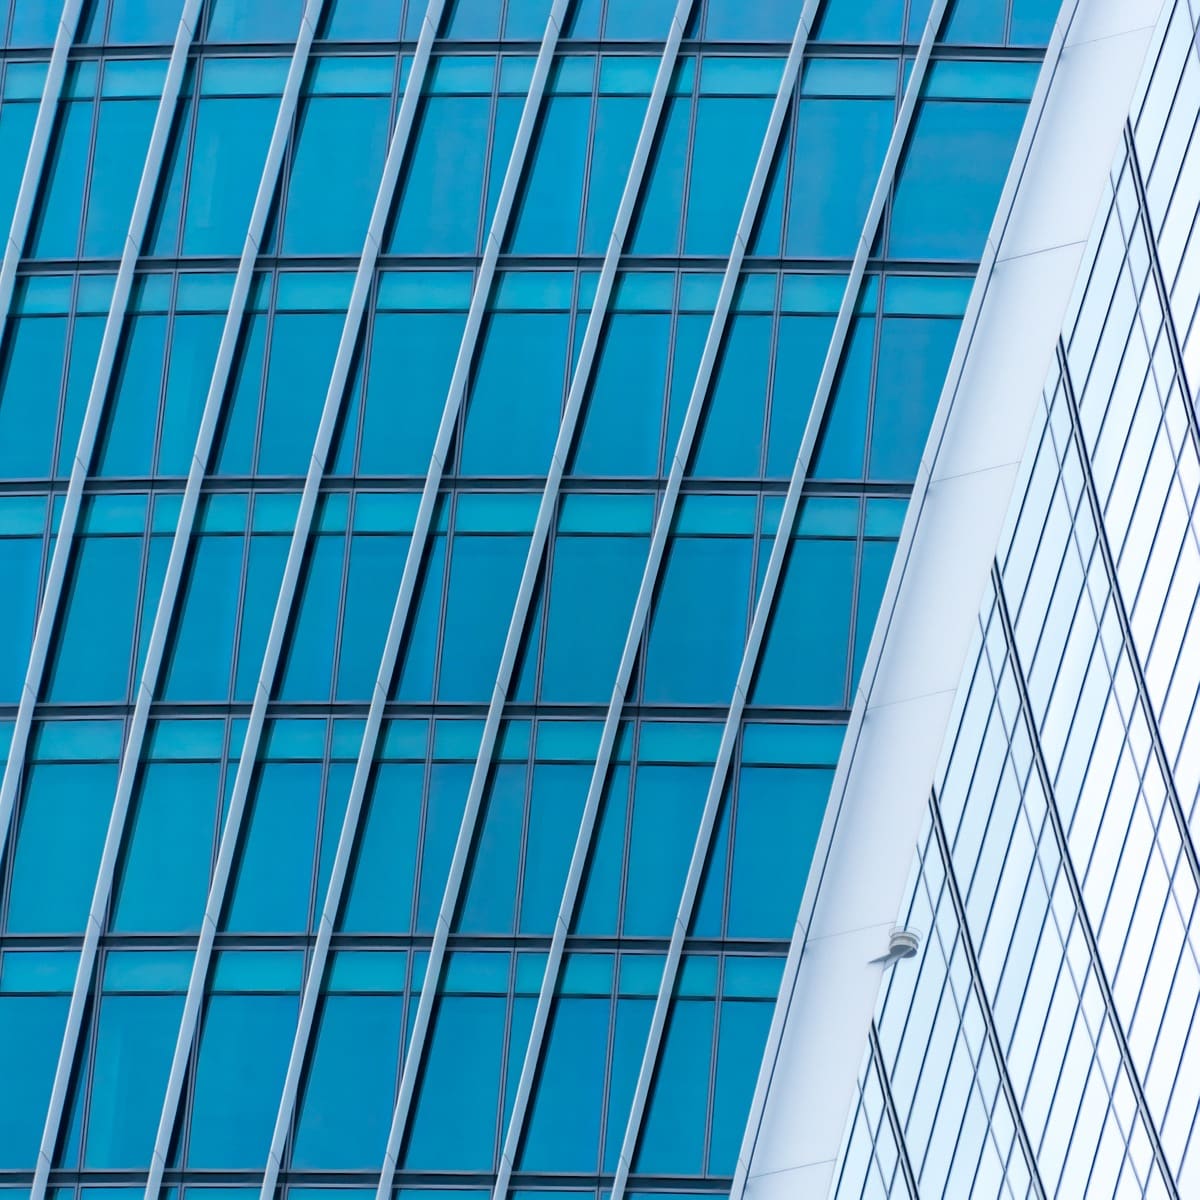 Detail of the skyscraper at 20 Fenchurch Street. It is a glass, aluminum, and steel structure, nicknamed the Walkie-Talkie Building due to its shape. The top-heavy design is partly intended to maximise floor space towards the top of the building, where rent is typically higher. This image is part of our London architectural abstracts portfolio.